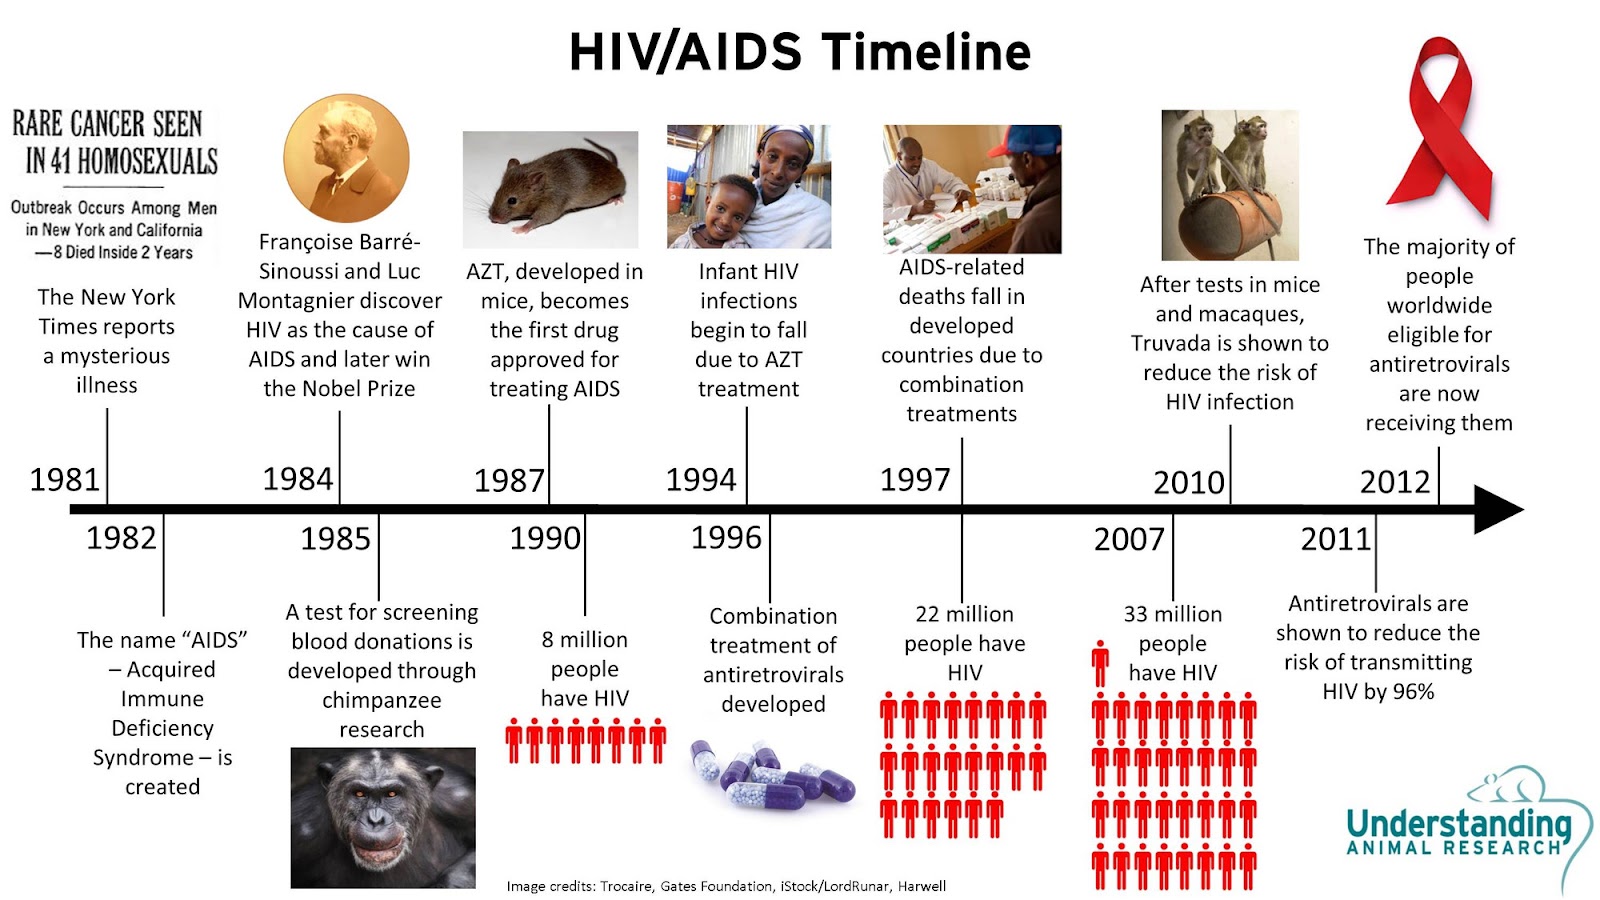 Understanding AIDS and HIV: Prevention, Treatment, and Overcoming Stigma